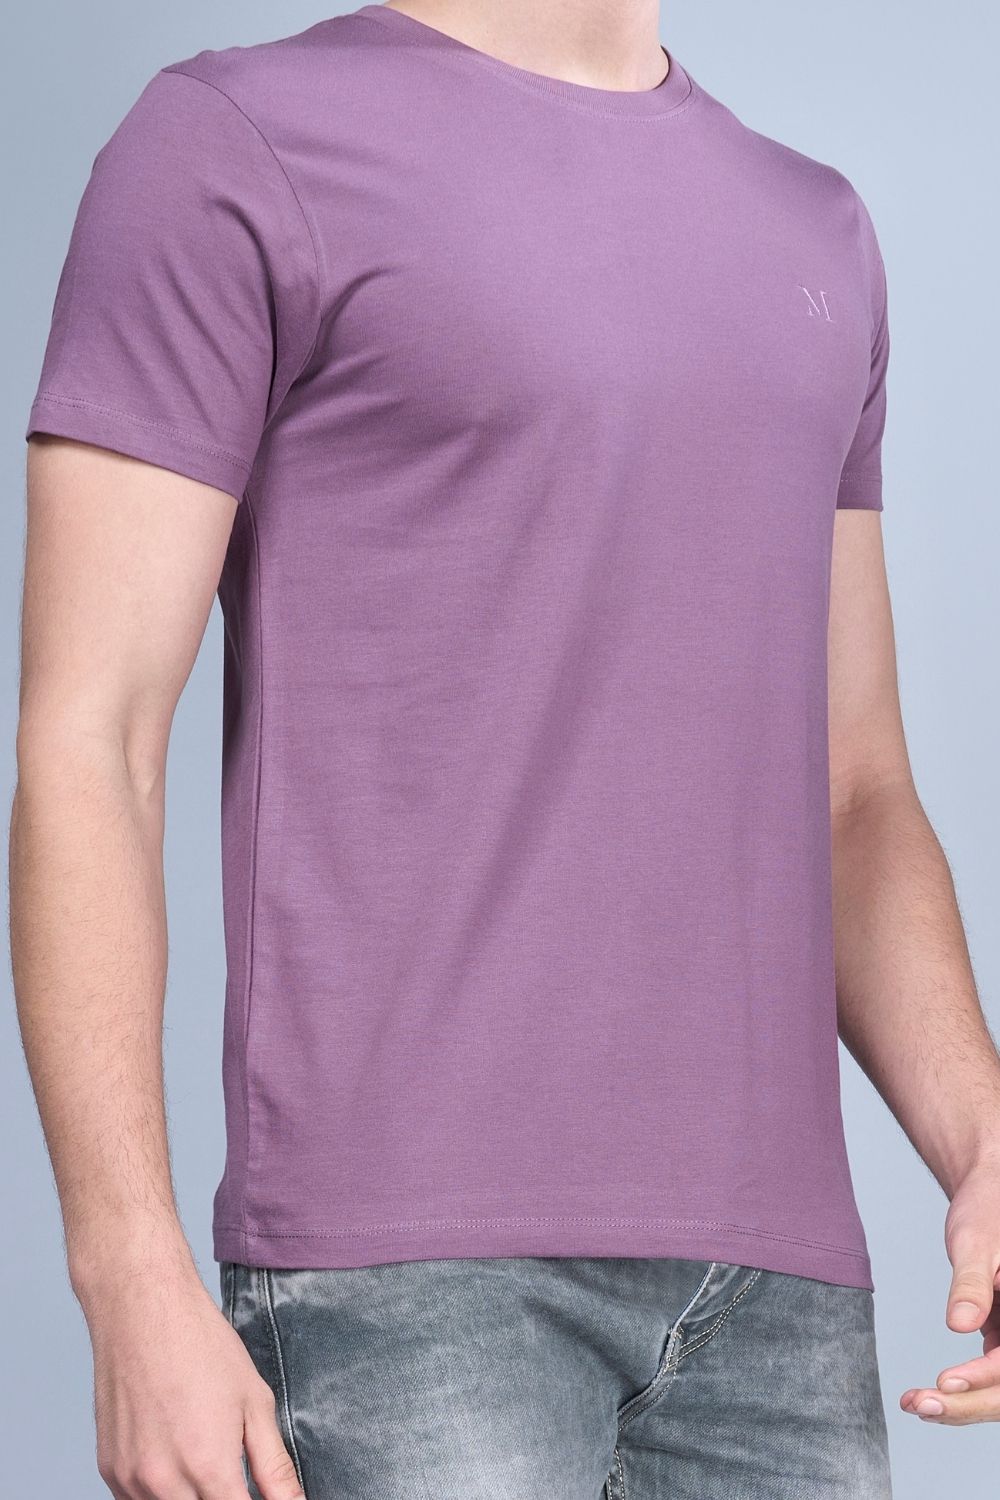 Light maroon colored, Solid T shirt for men, with half sleeves and round neck, side view.